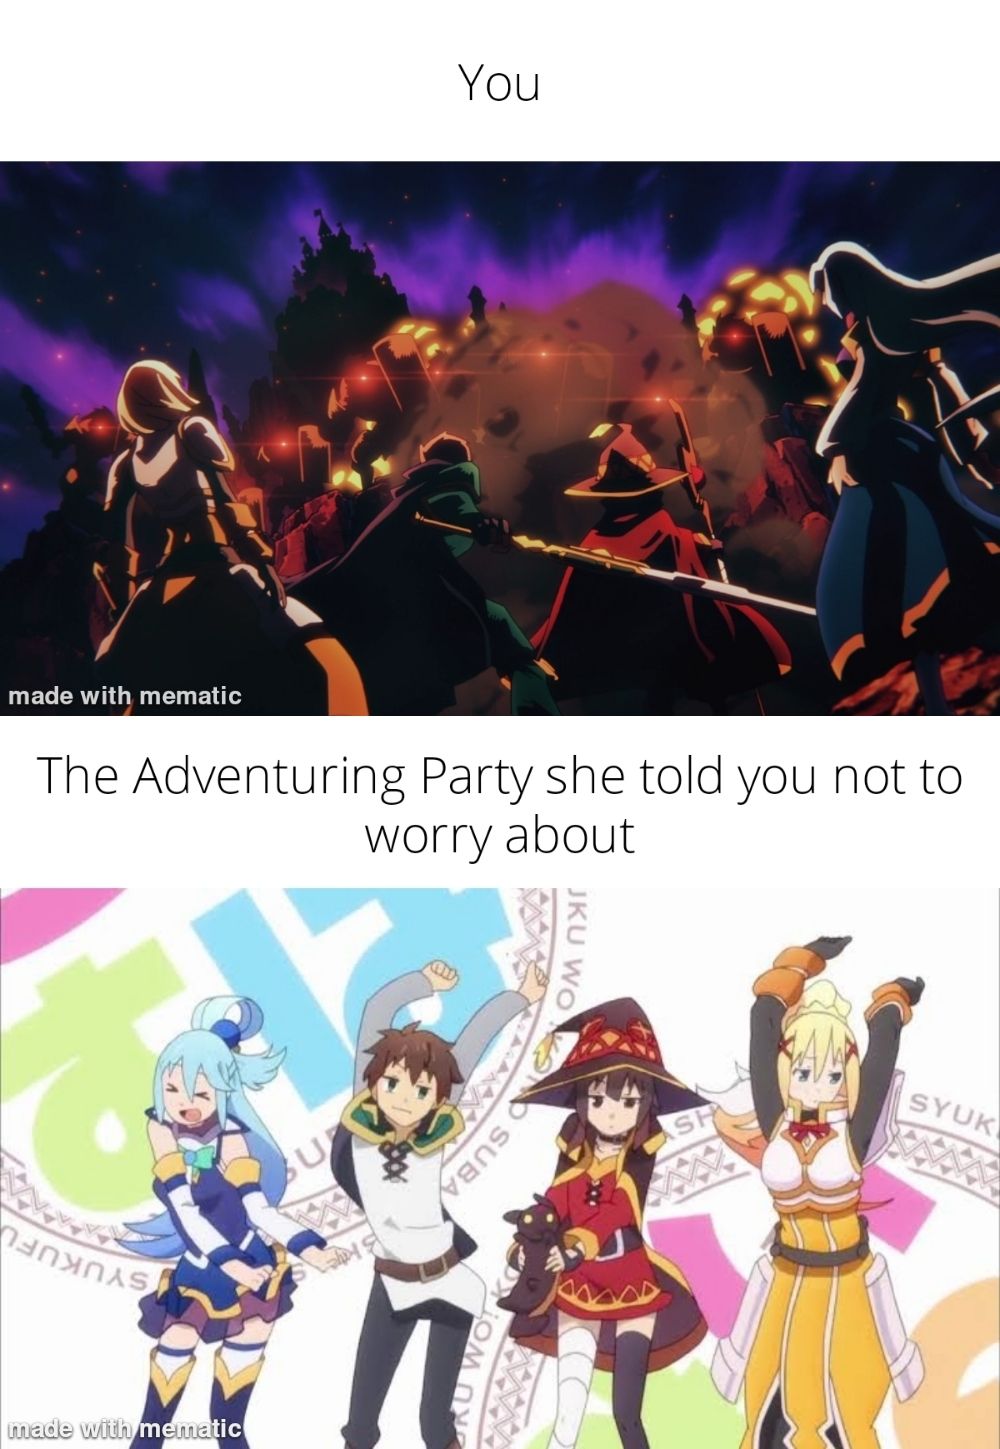 Megumin's imagination is very cool